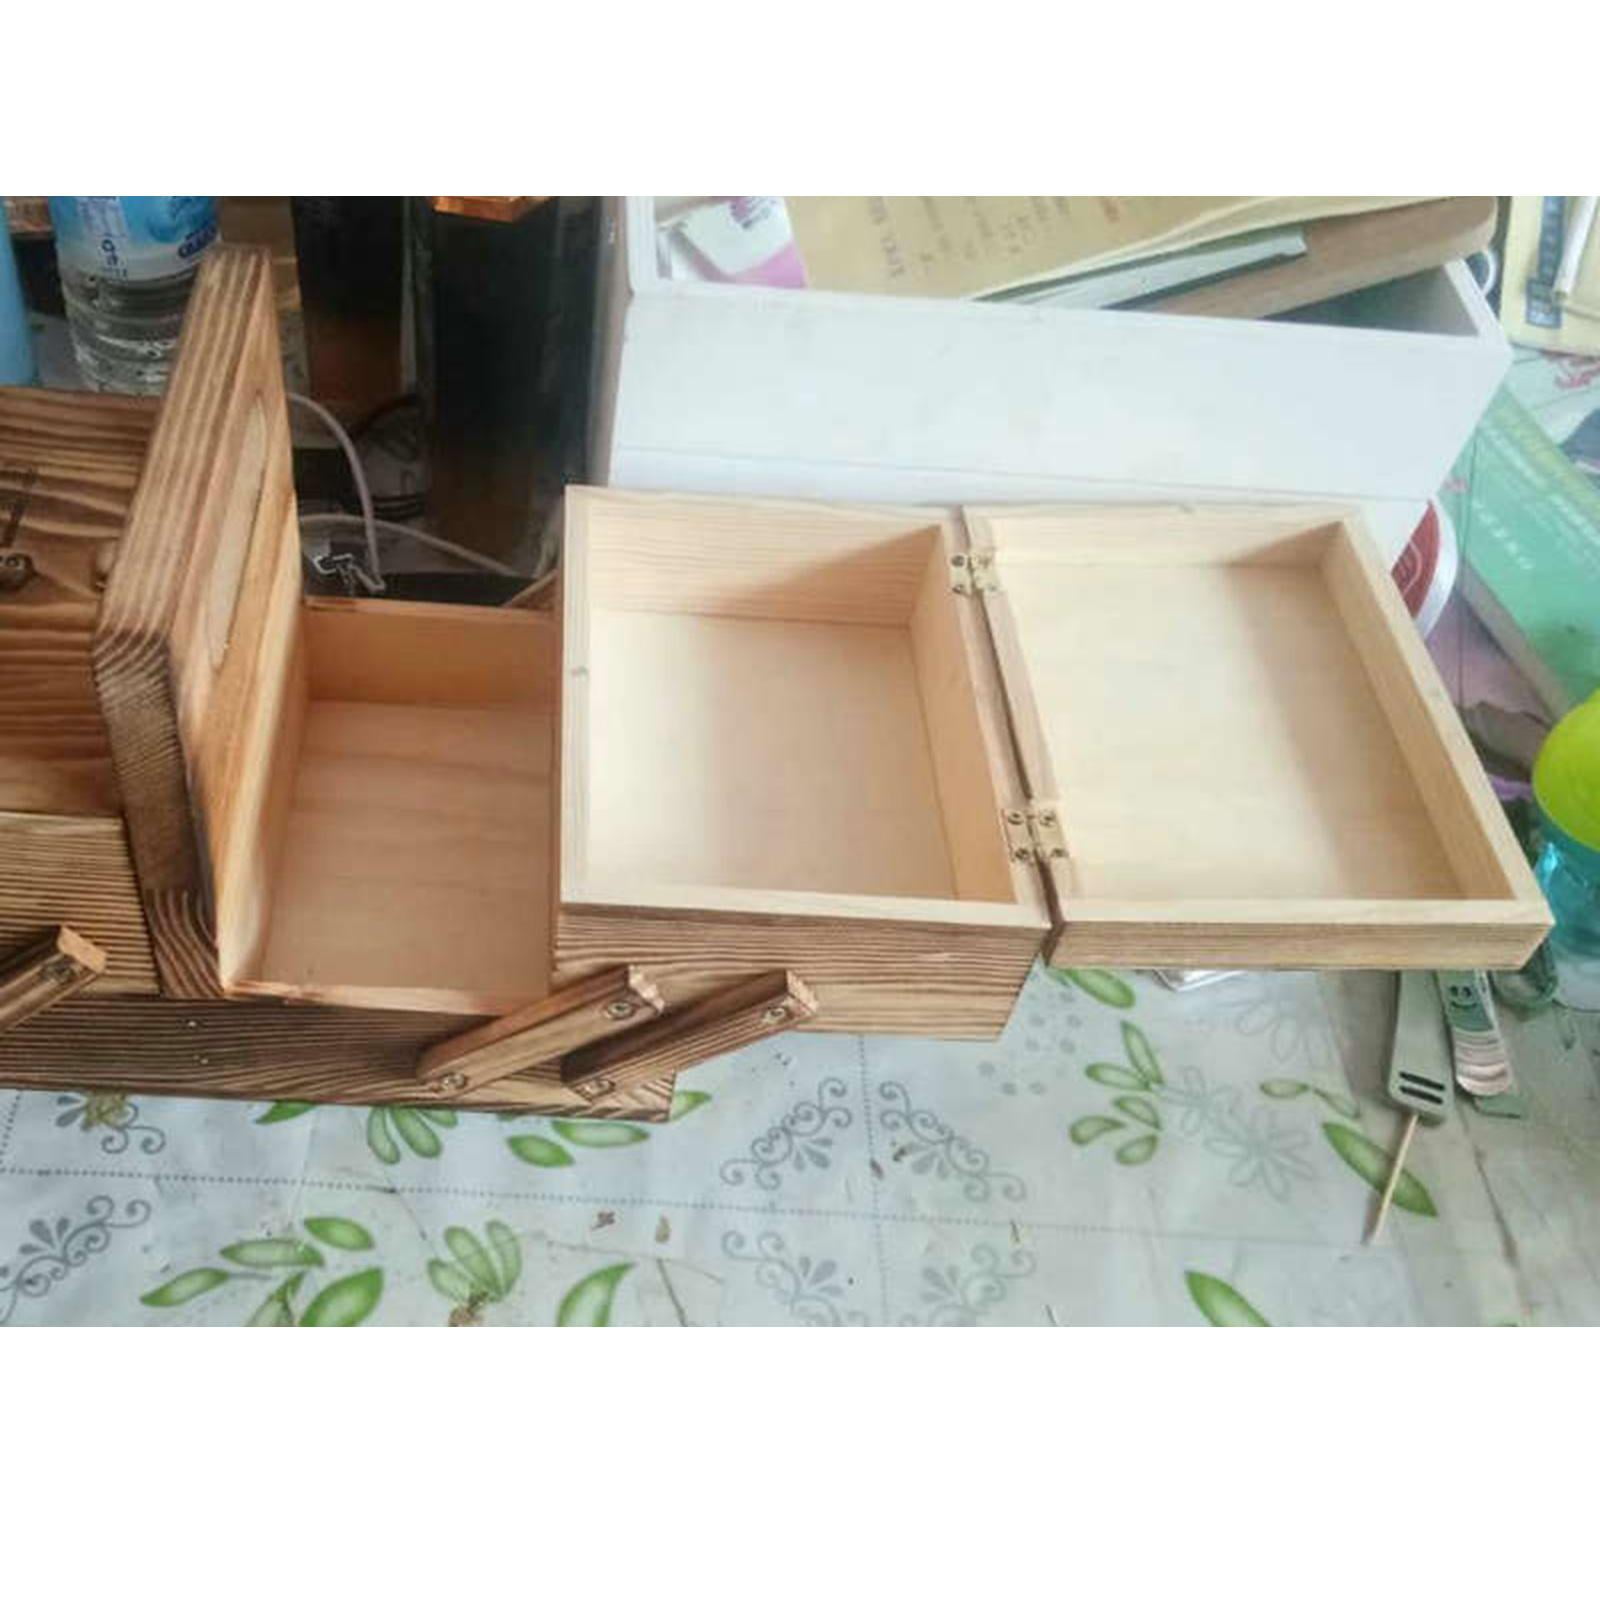 Lot - SEWING BOX AND BASKET Sewing box height 4. Width 8. Depth